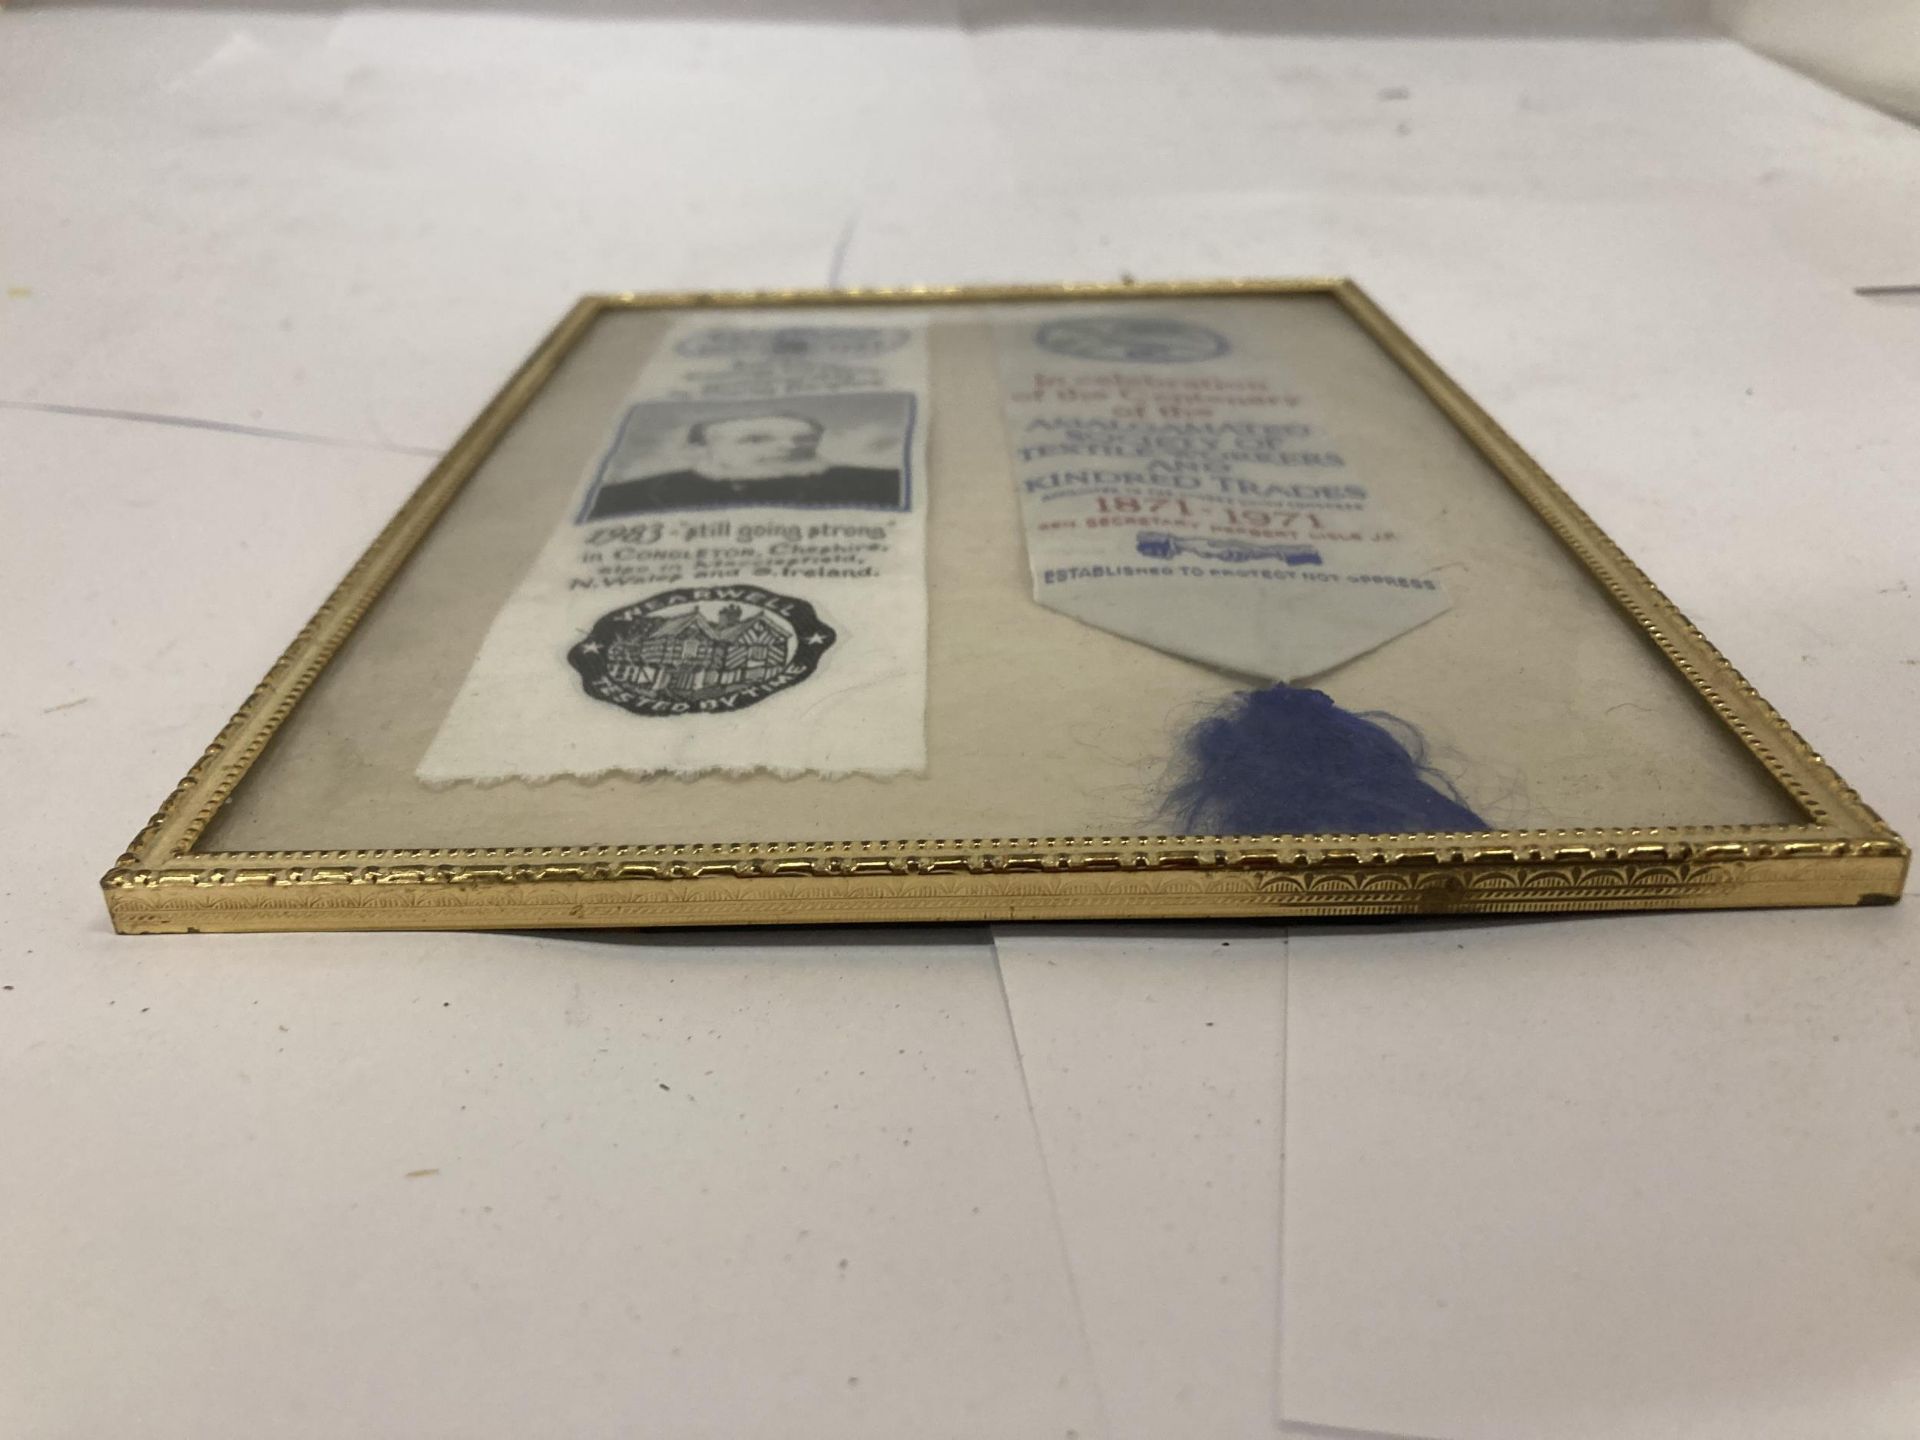 A FRAMED SILK RIBBONS AMALGAMATED SOCIETY OF TEXTILE WORKERS AND BERISFORDS EMBROIDERY RIBBON AWARD - Image 2 of 3